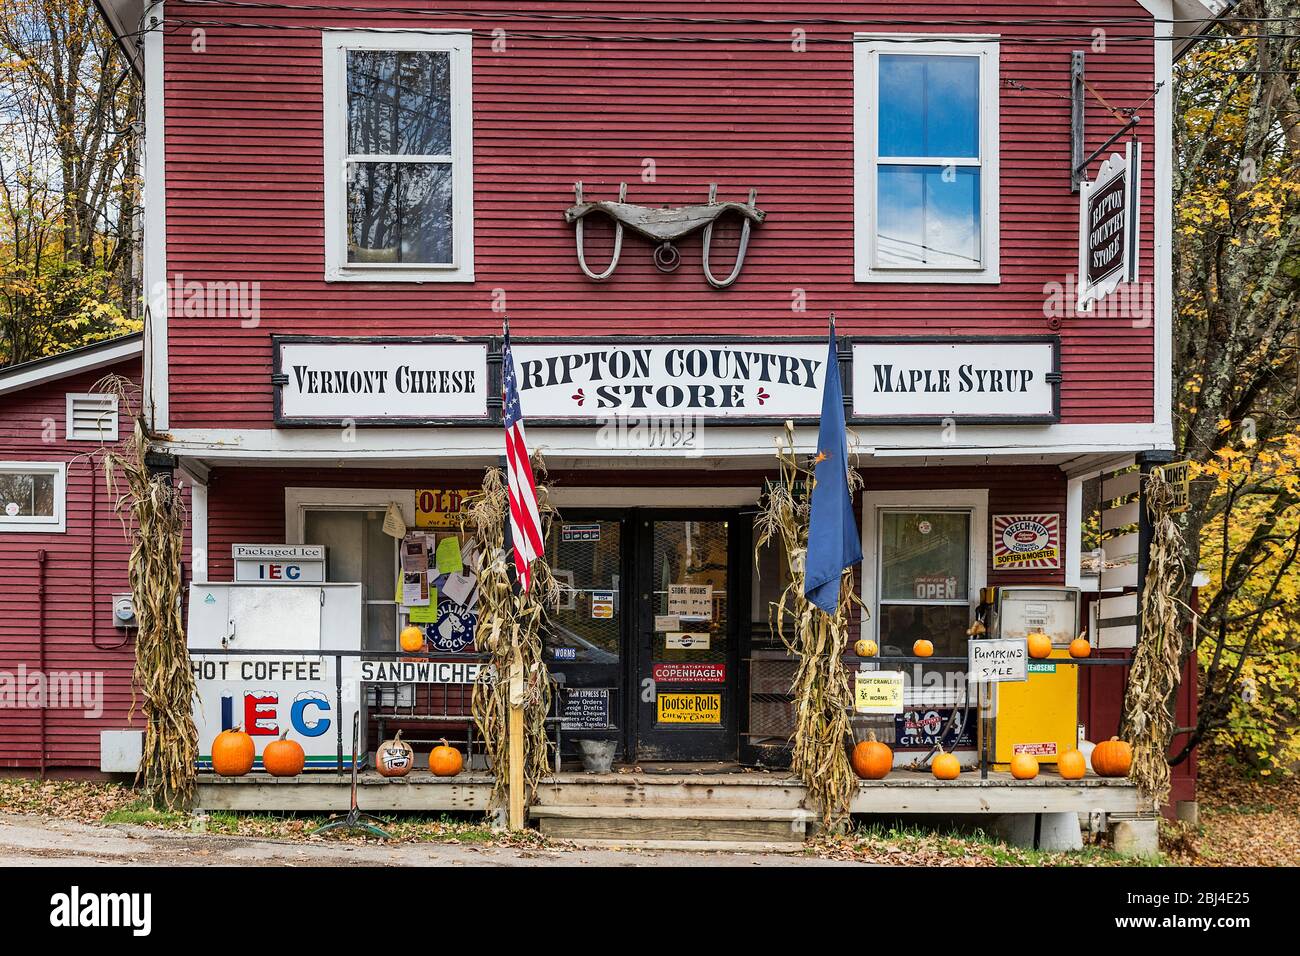 Charmant Ripton Country Store. Banque D'Images